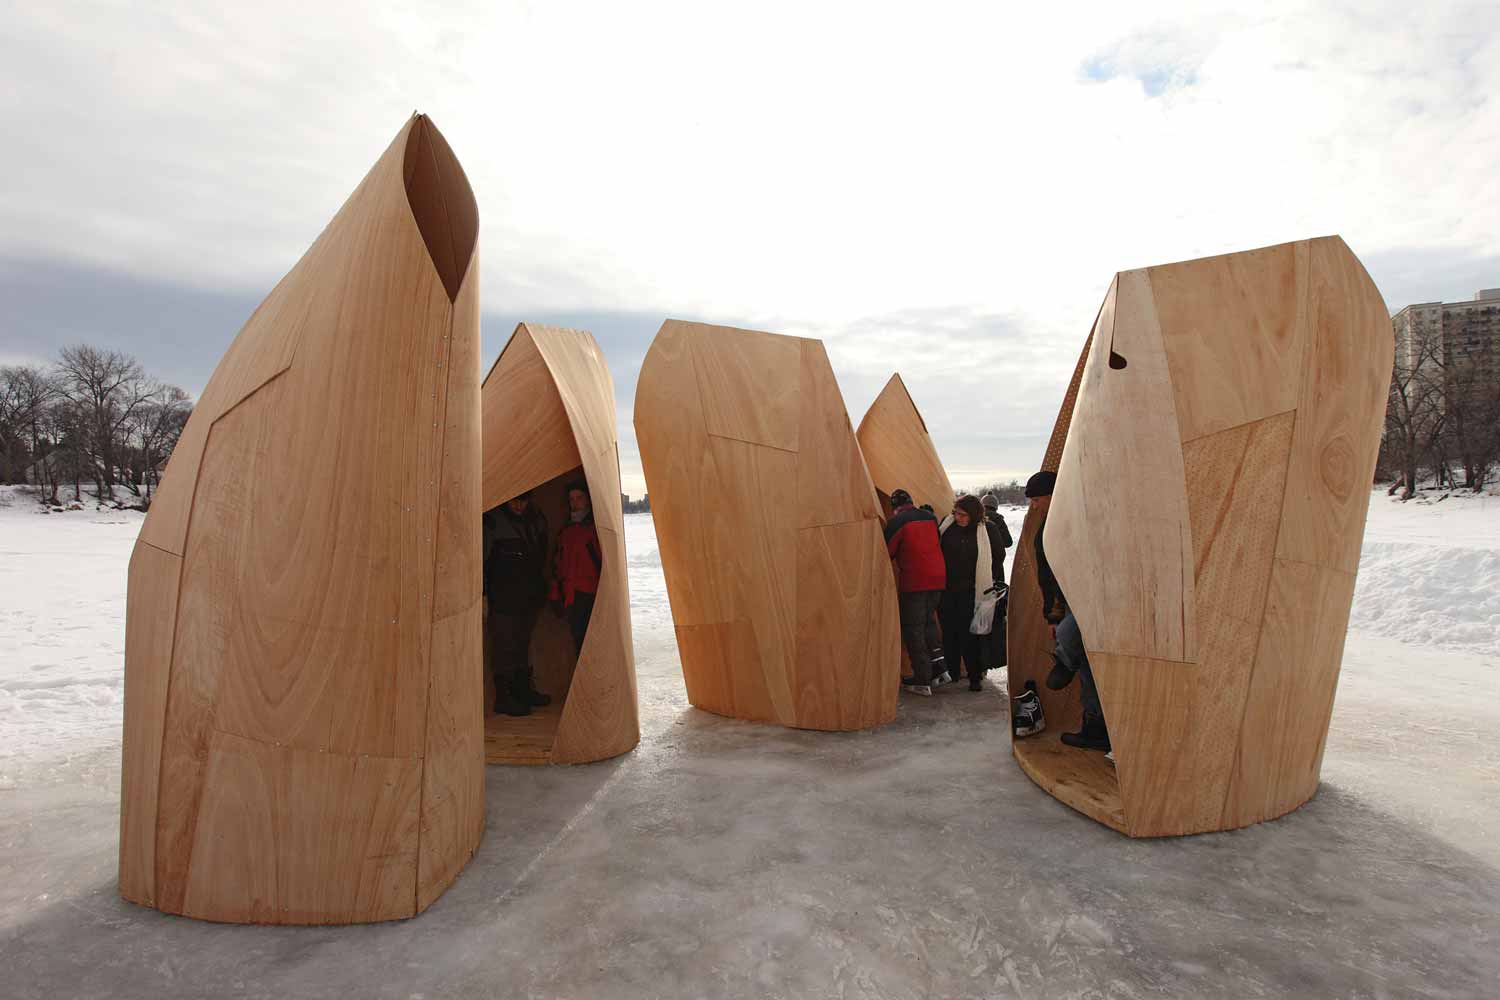 Multiple uniquely shaped huts made of flexible moulded plywood are clustered on the river trail. Skaters are visible inside some, and are entering the openings in others.